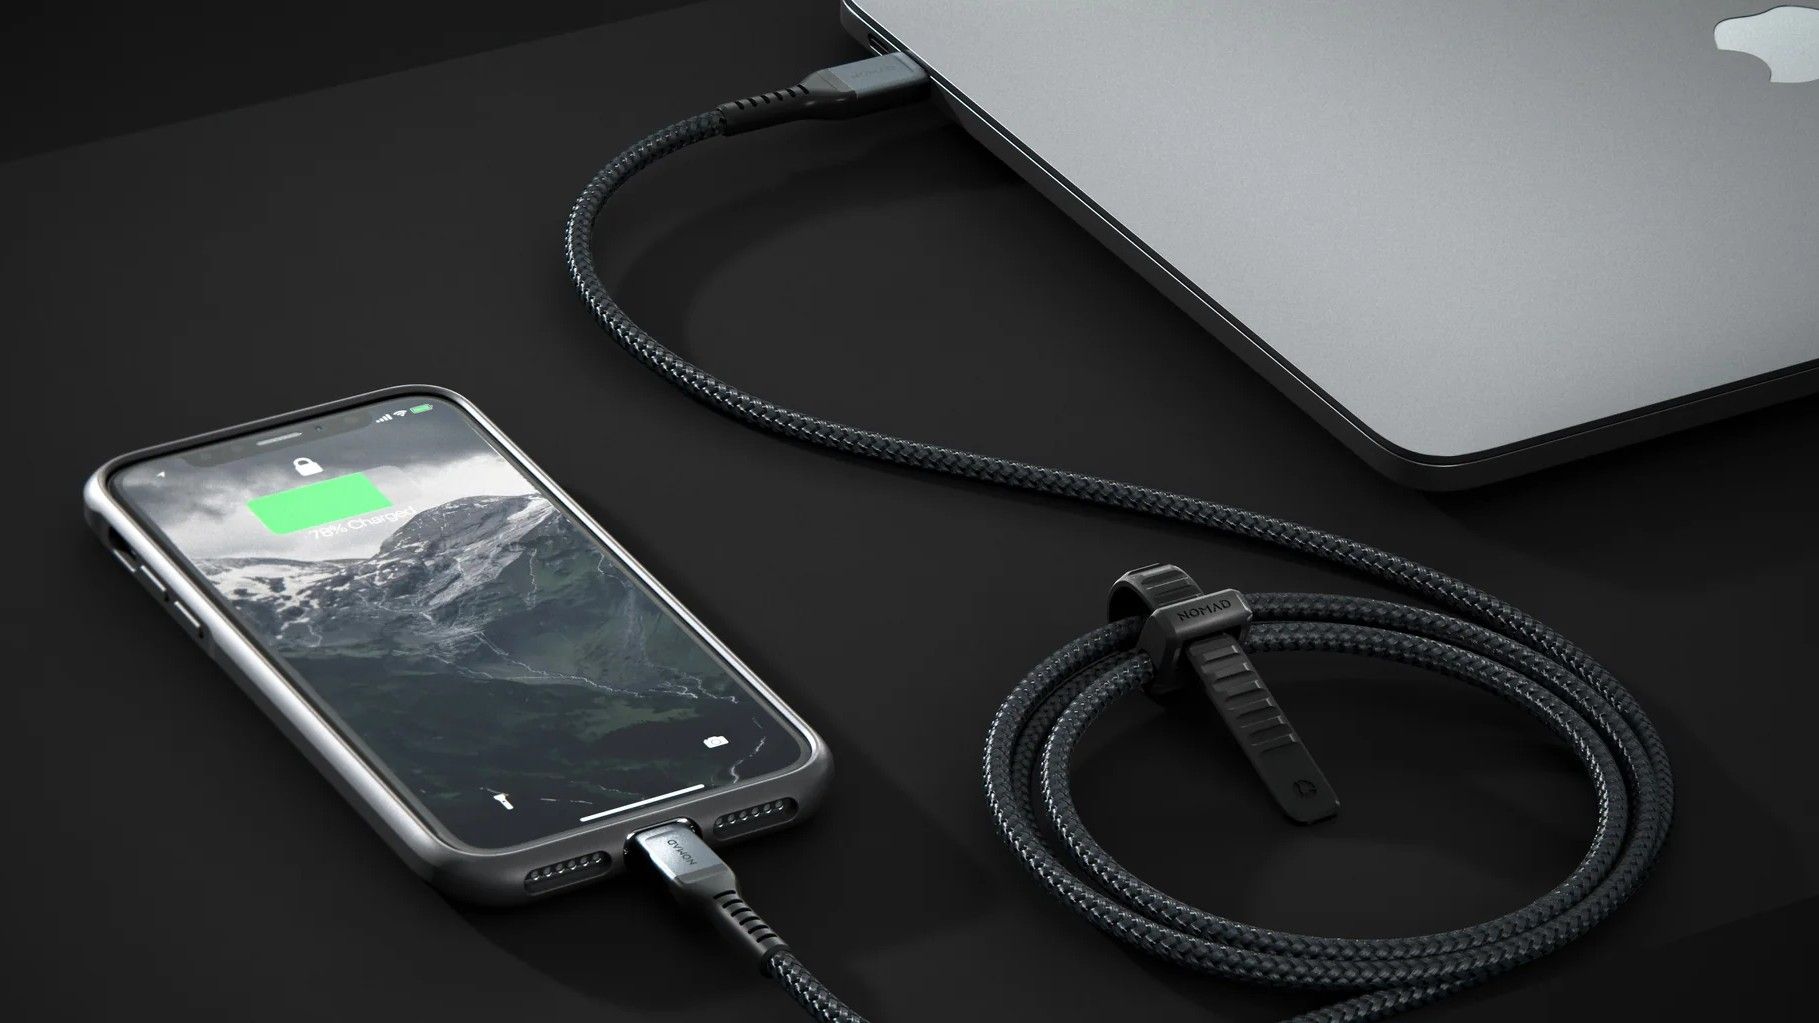 A Nomad Lightning connects an iPhone and MacBook Pro